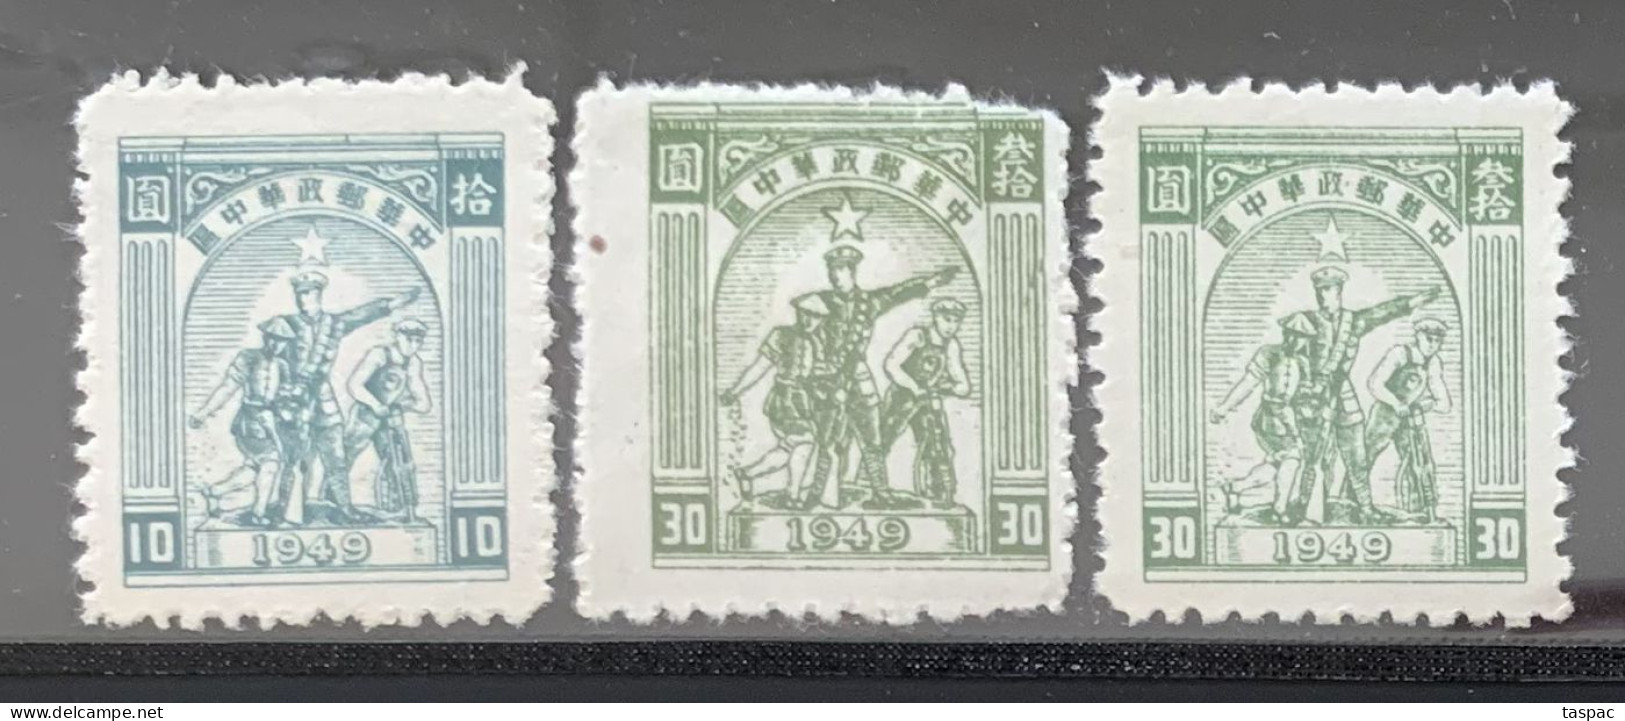 Central China 1949 Mi# 87, 89 A, 89 B (*) Mint No Gum - Short Set - Farmer, Soldier And Worker - Chine Centrale 1948-49